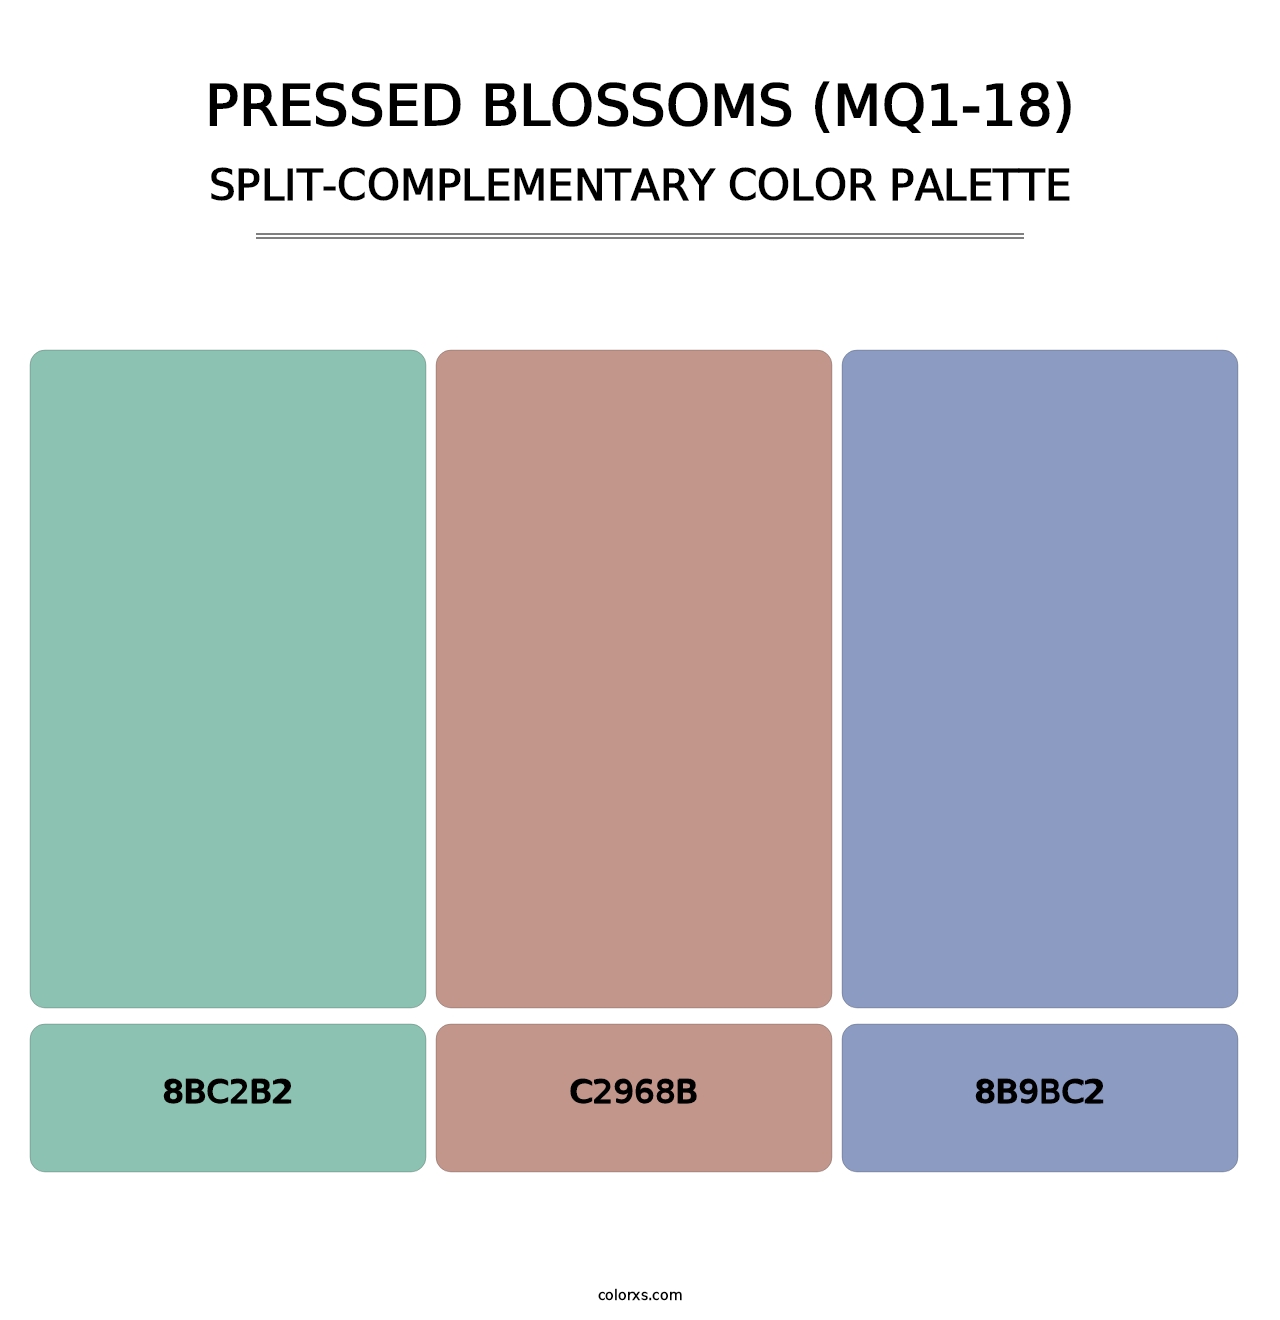 Pressed Blossoms (MQ1-18) - Split-Complementary Color Palette